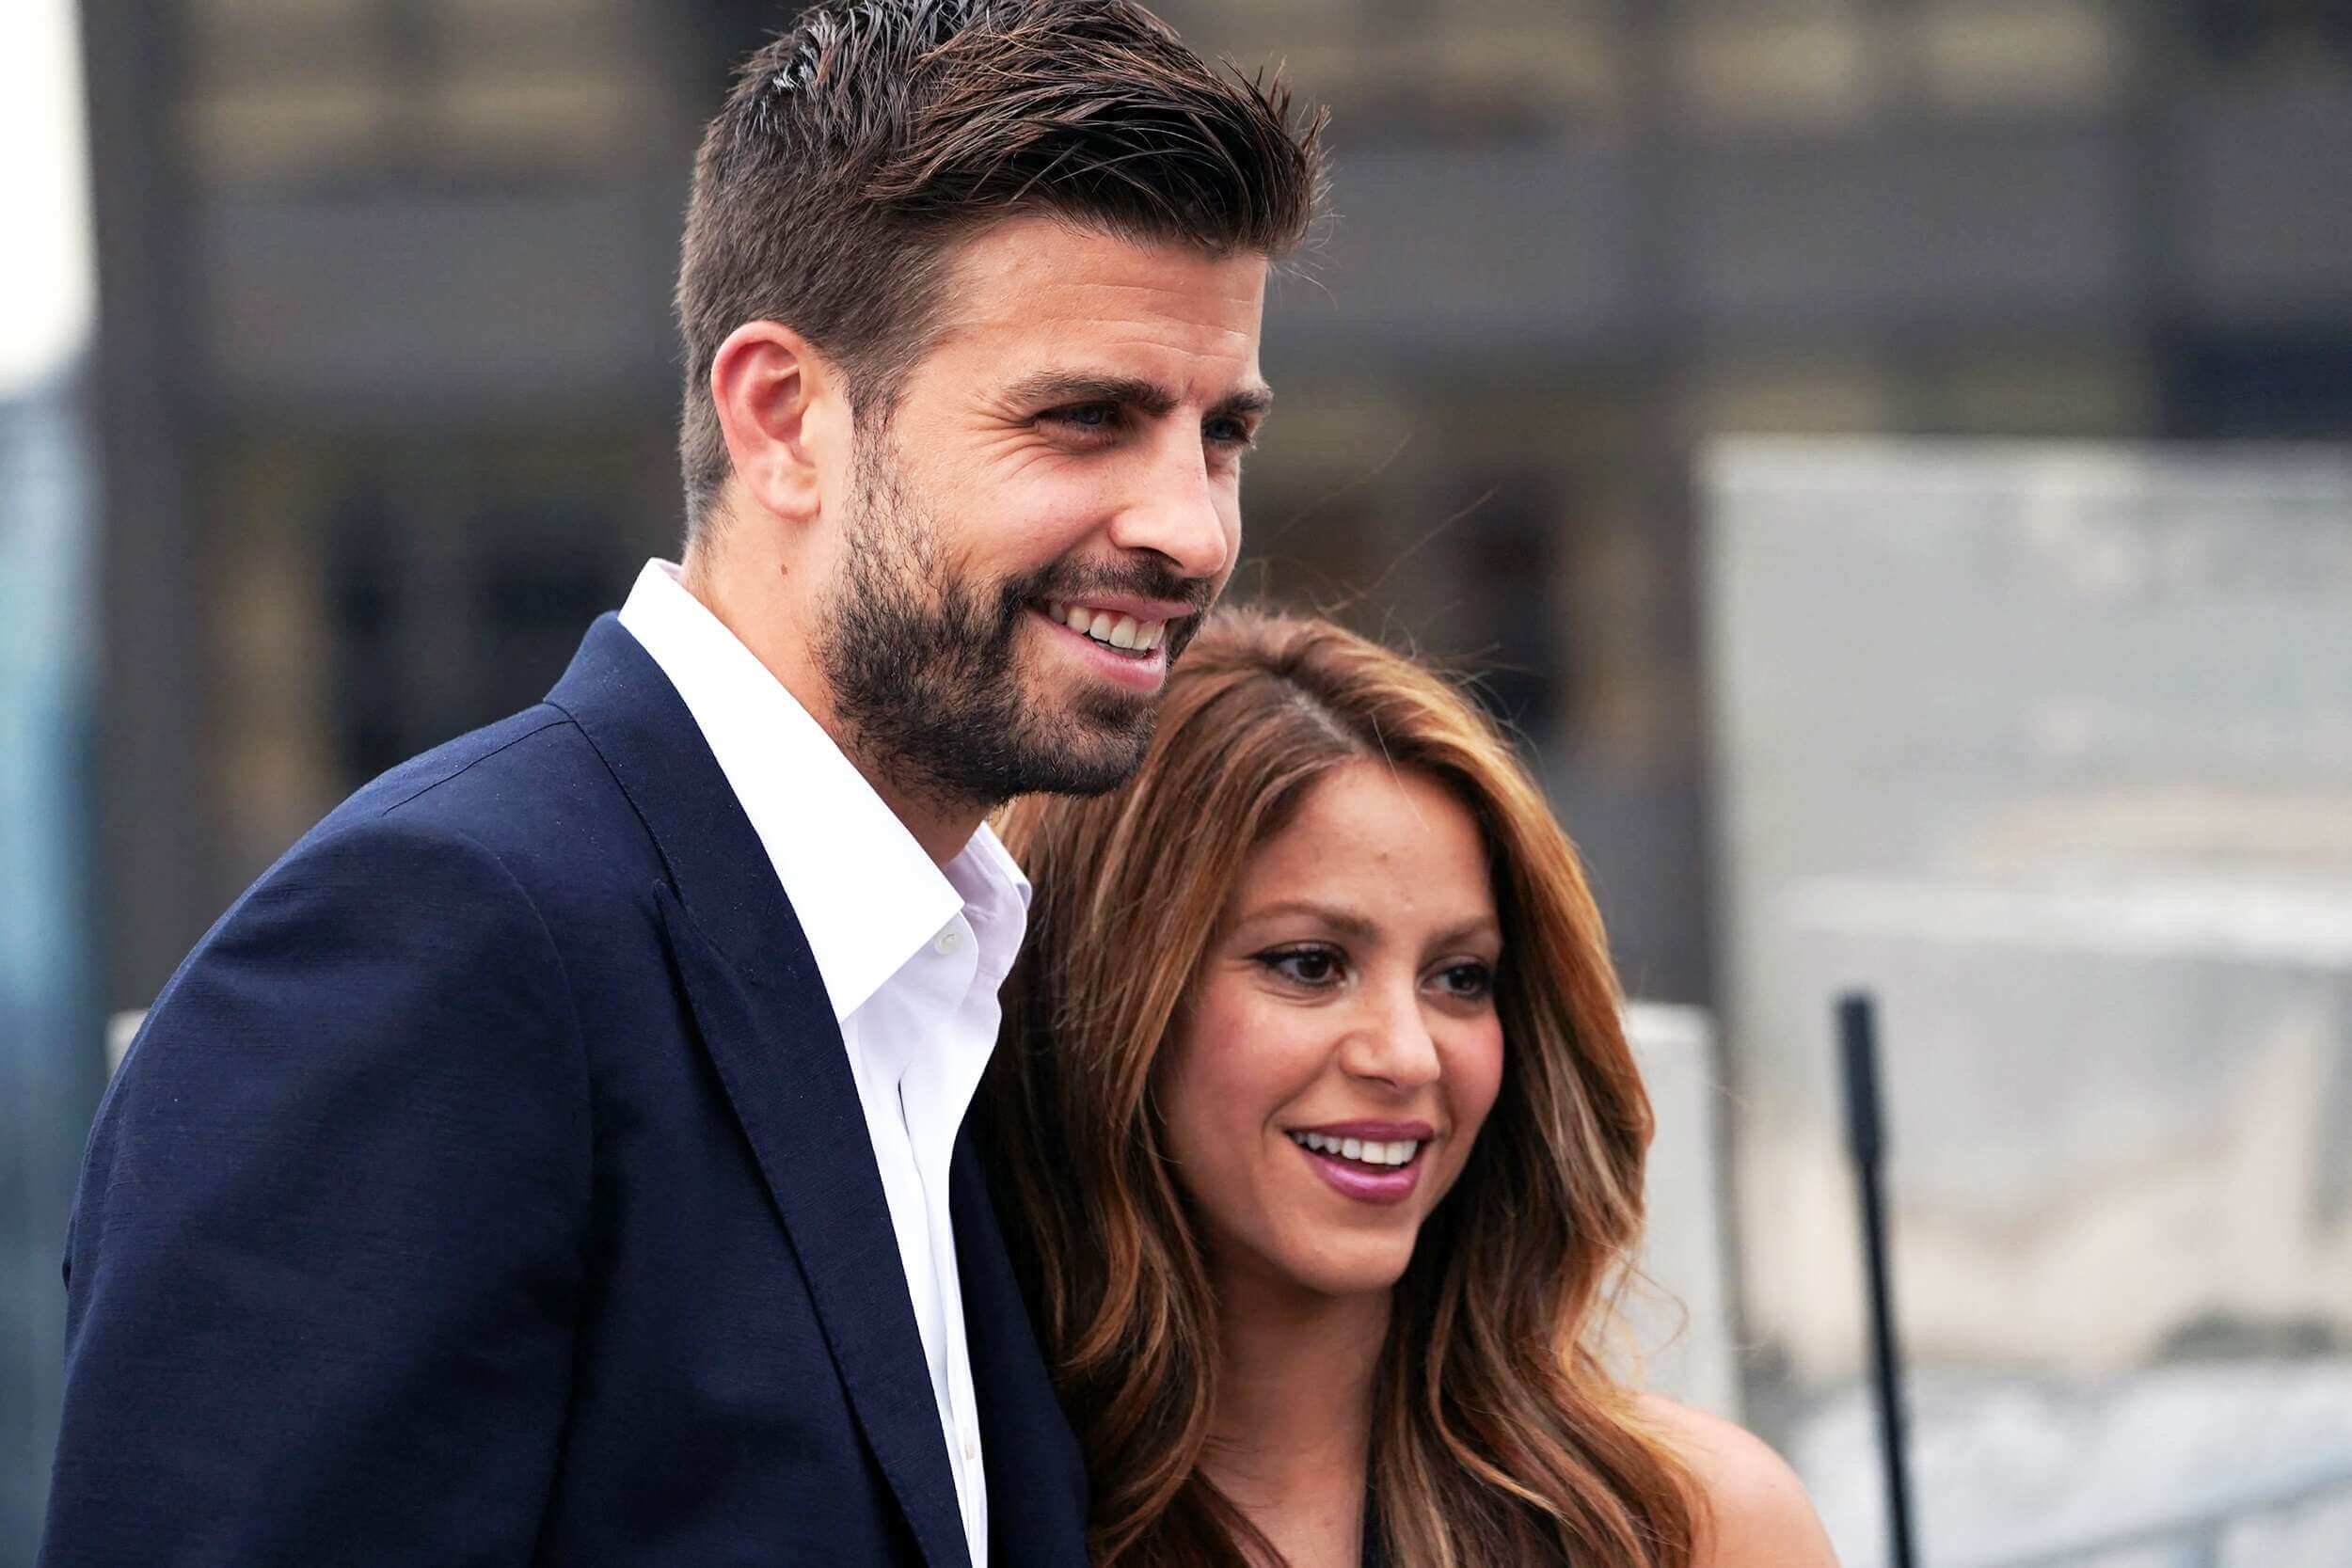 The Columbian pop star with Gerard Pique 